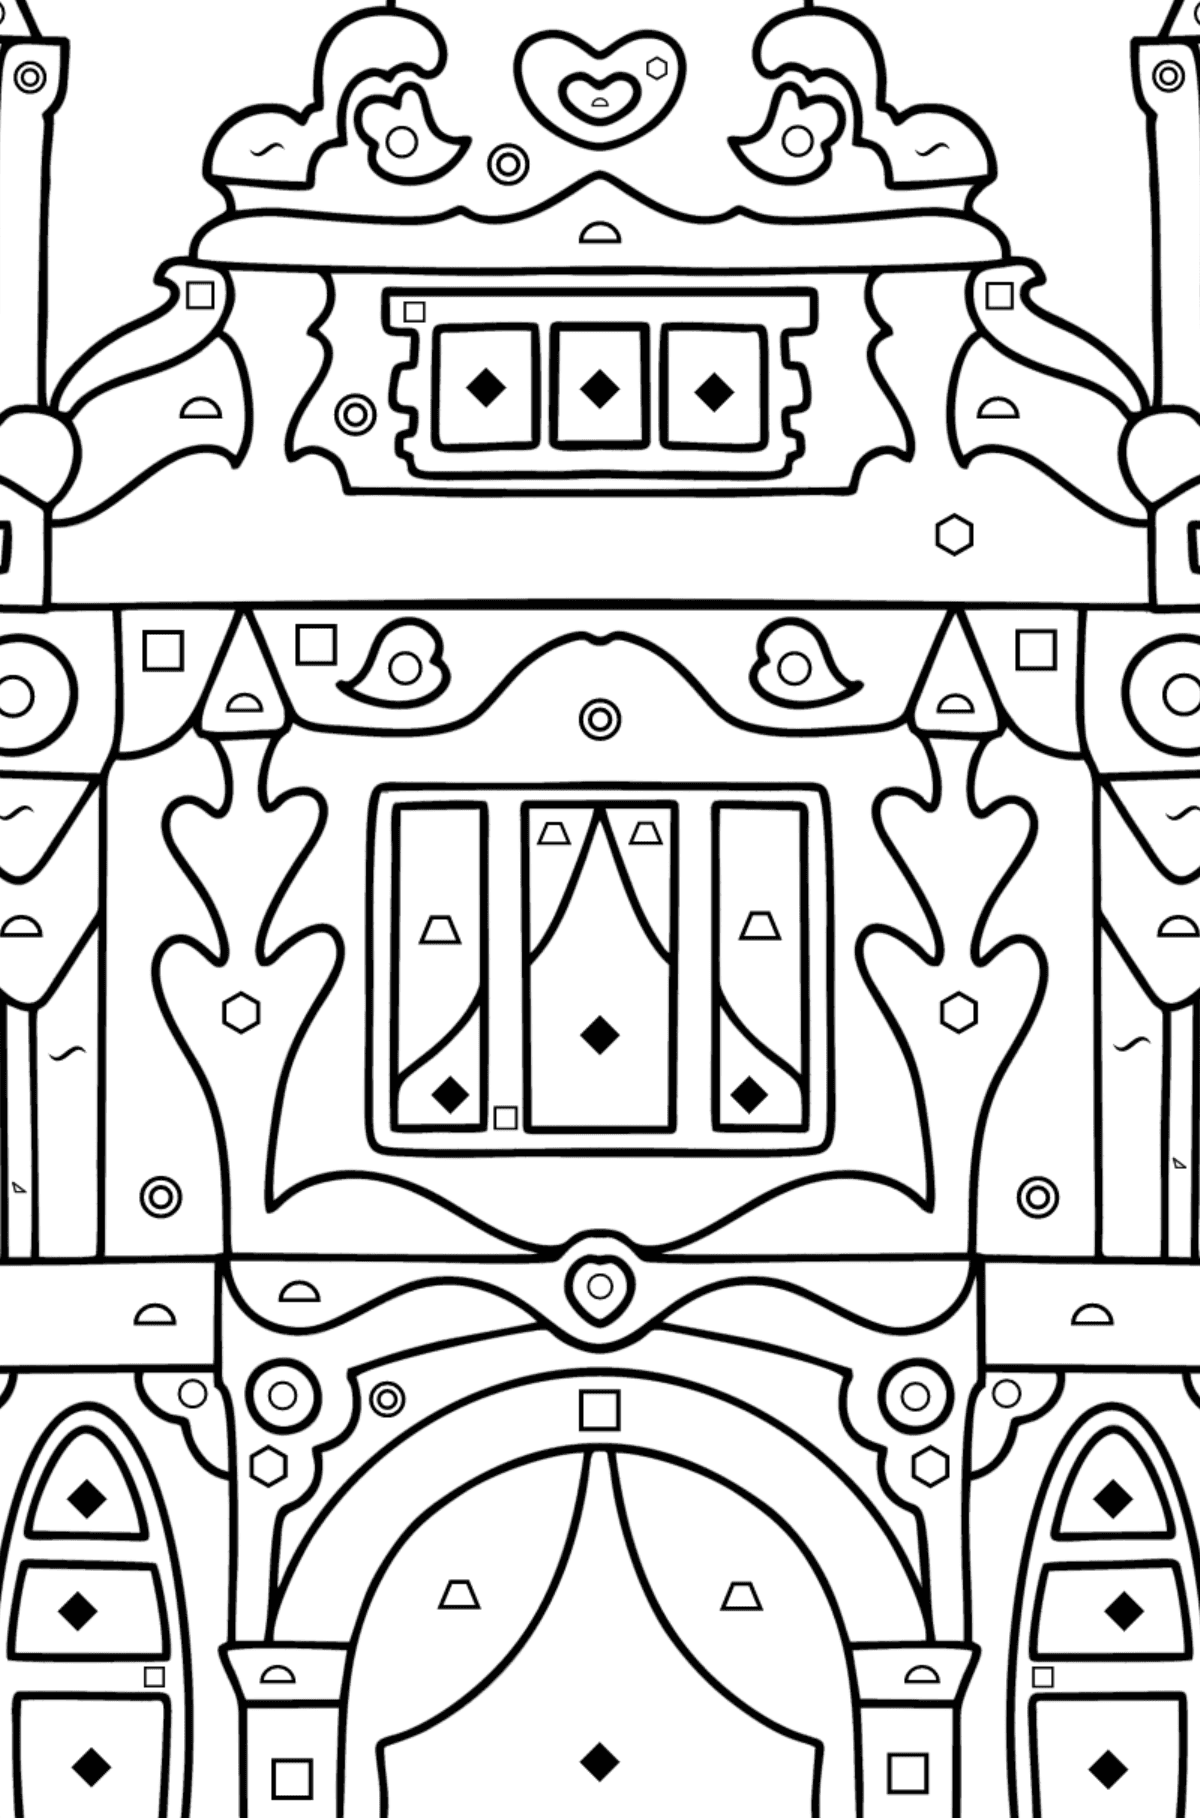 Two Storey House coloring page - Coloring by Symbols and Geometric Shapes for Kids